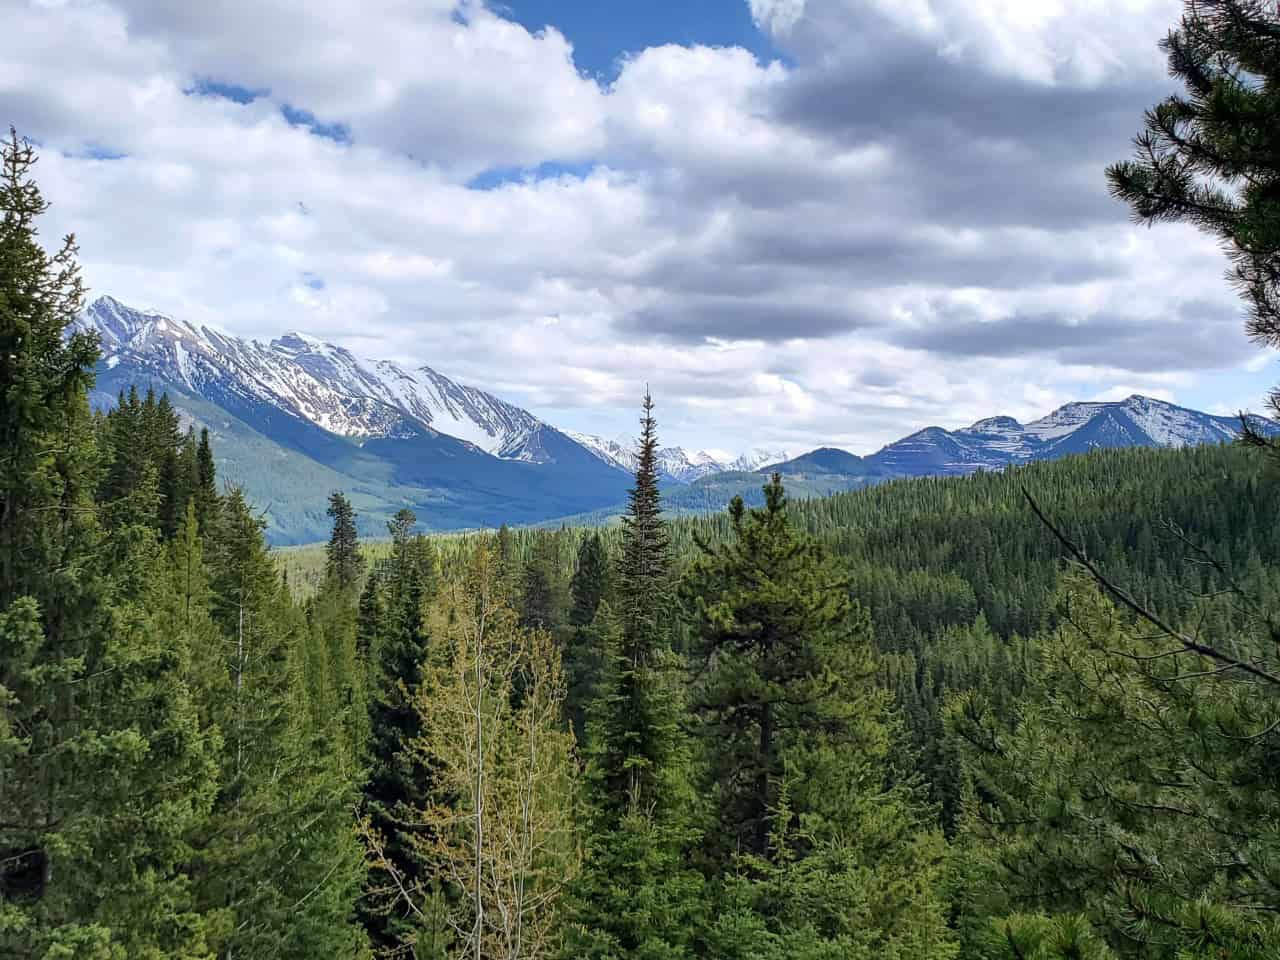 Island Ridge OHV Trails in Alberta Canada  - You're treated with some amazing views whether you're hiking, biking or quadding in the area. The views surrounding Island Ridge in the Crowsnest.